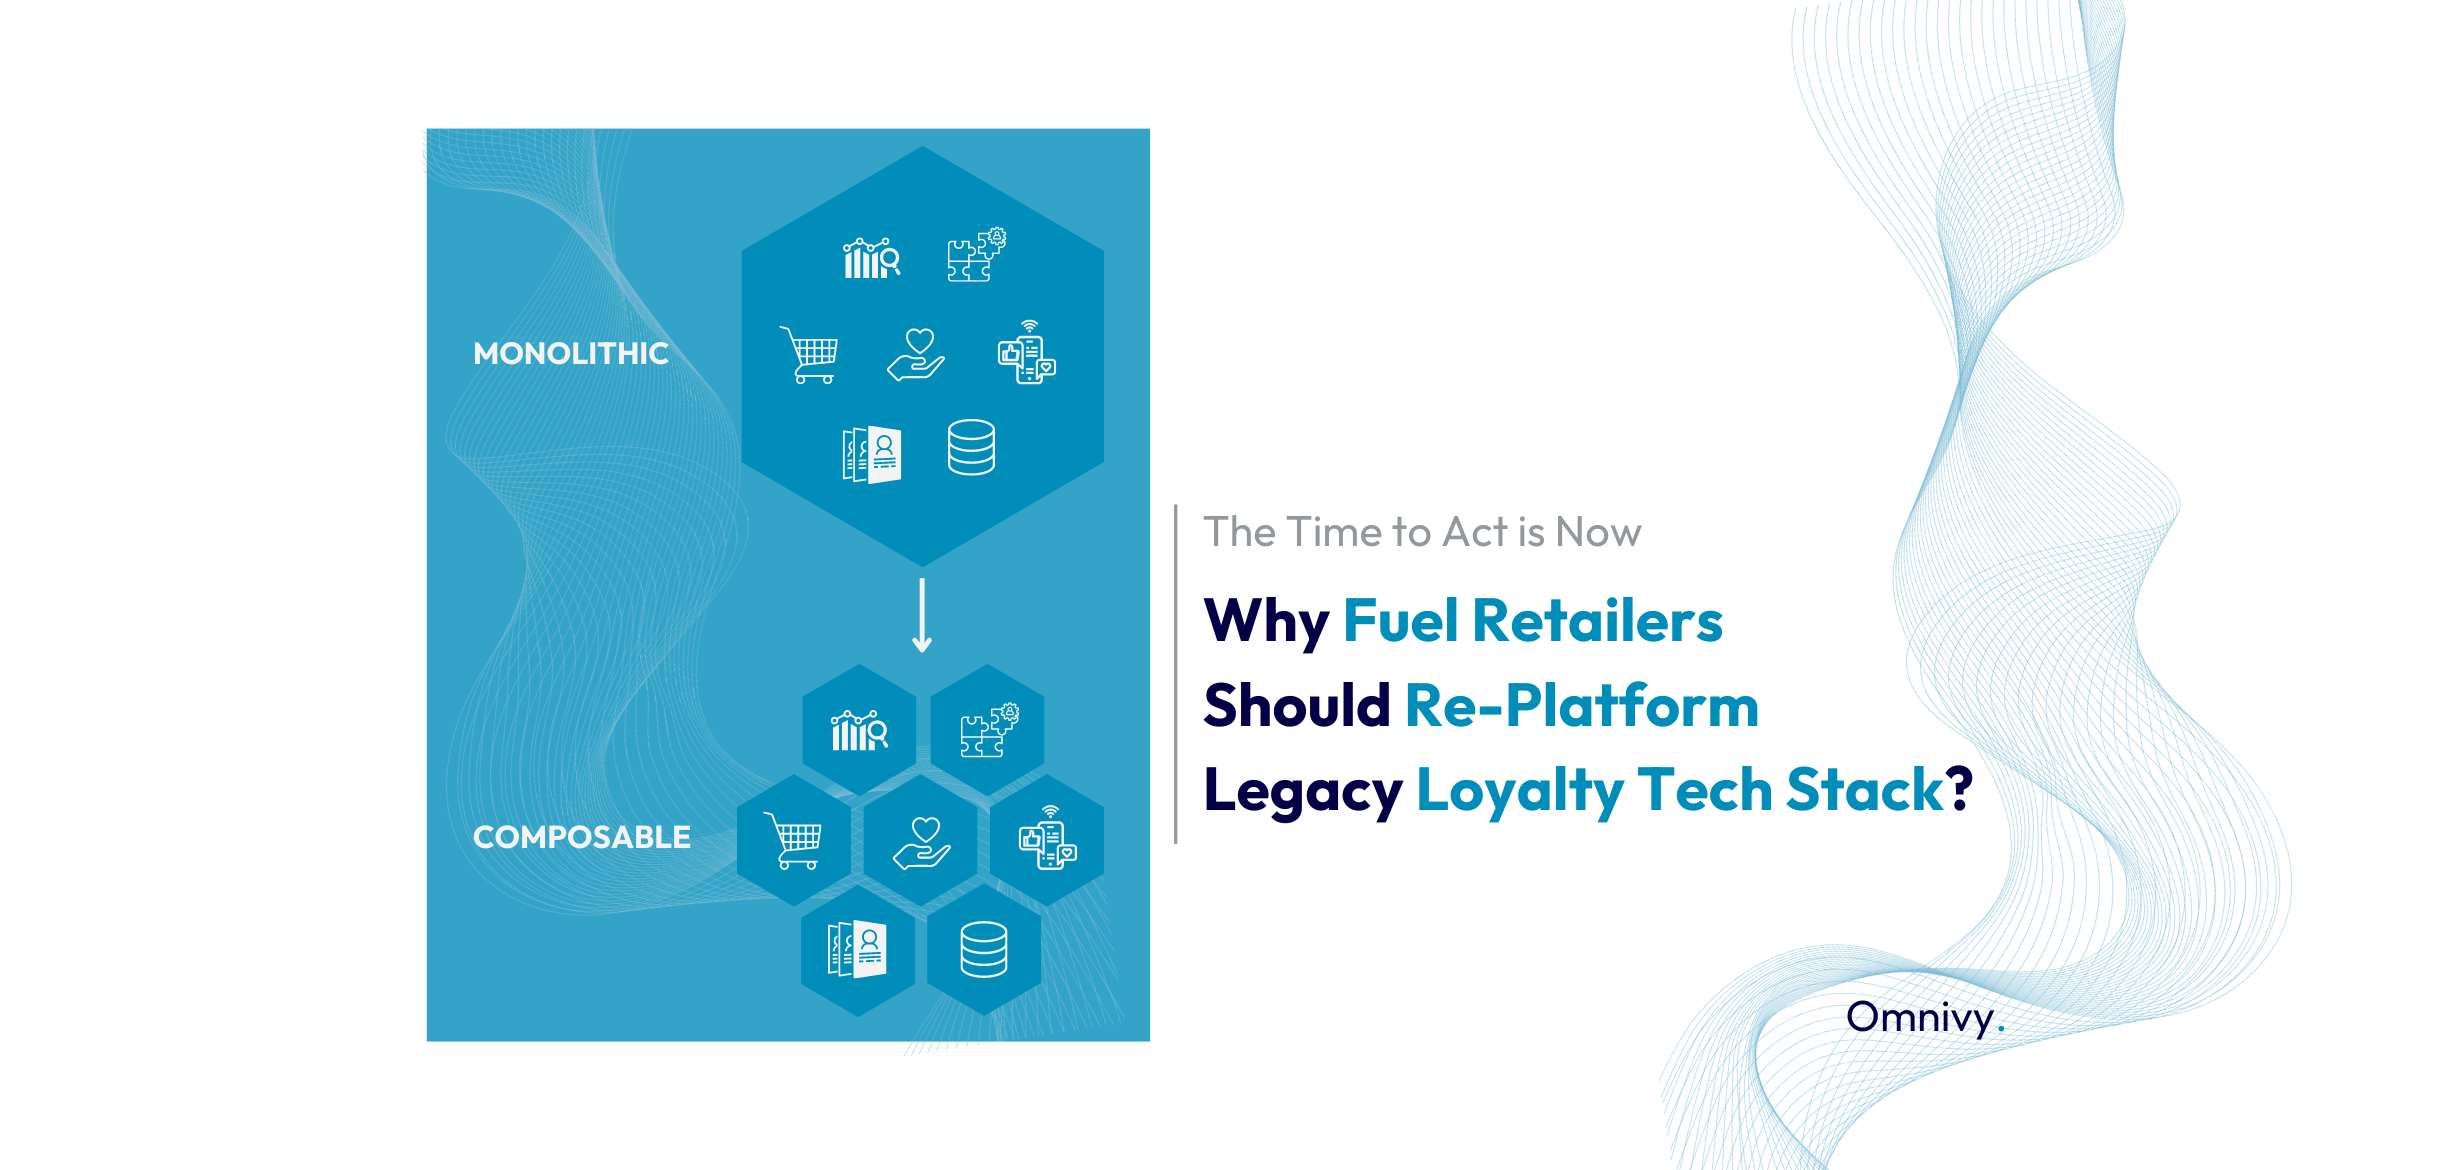 Why Fuel Retailers Should Re-Platform Their Legacy Loyalty Tech Stack Right Now